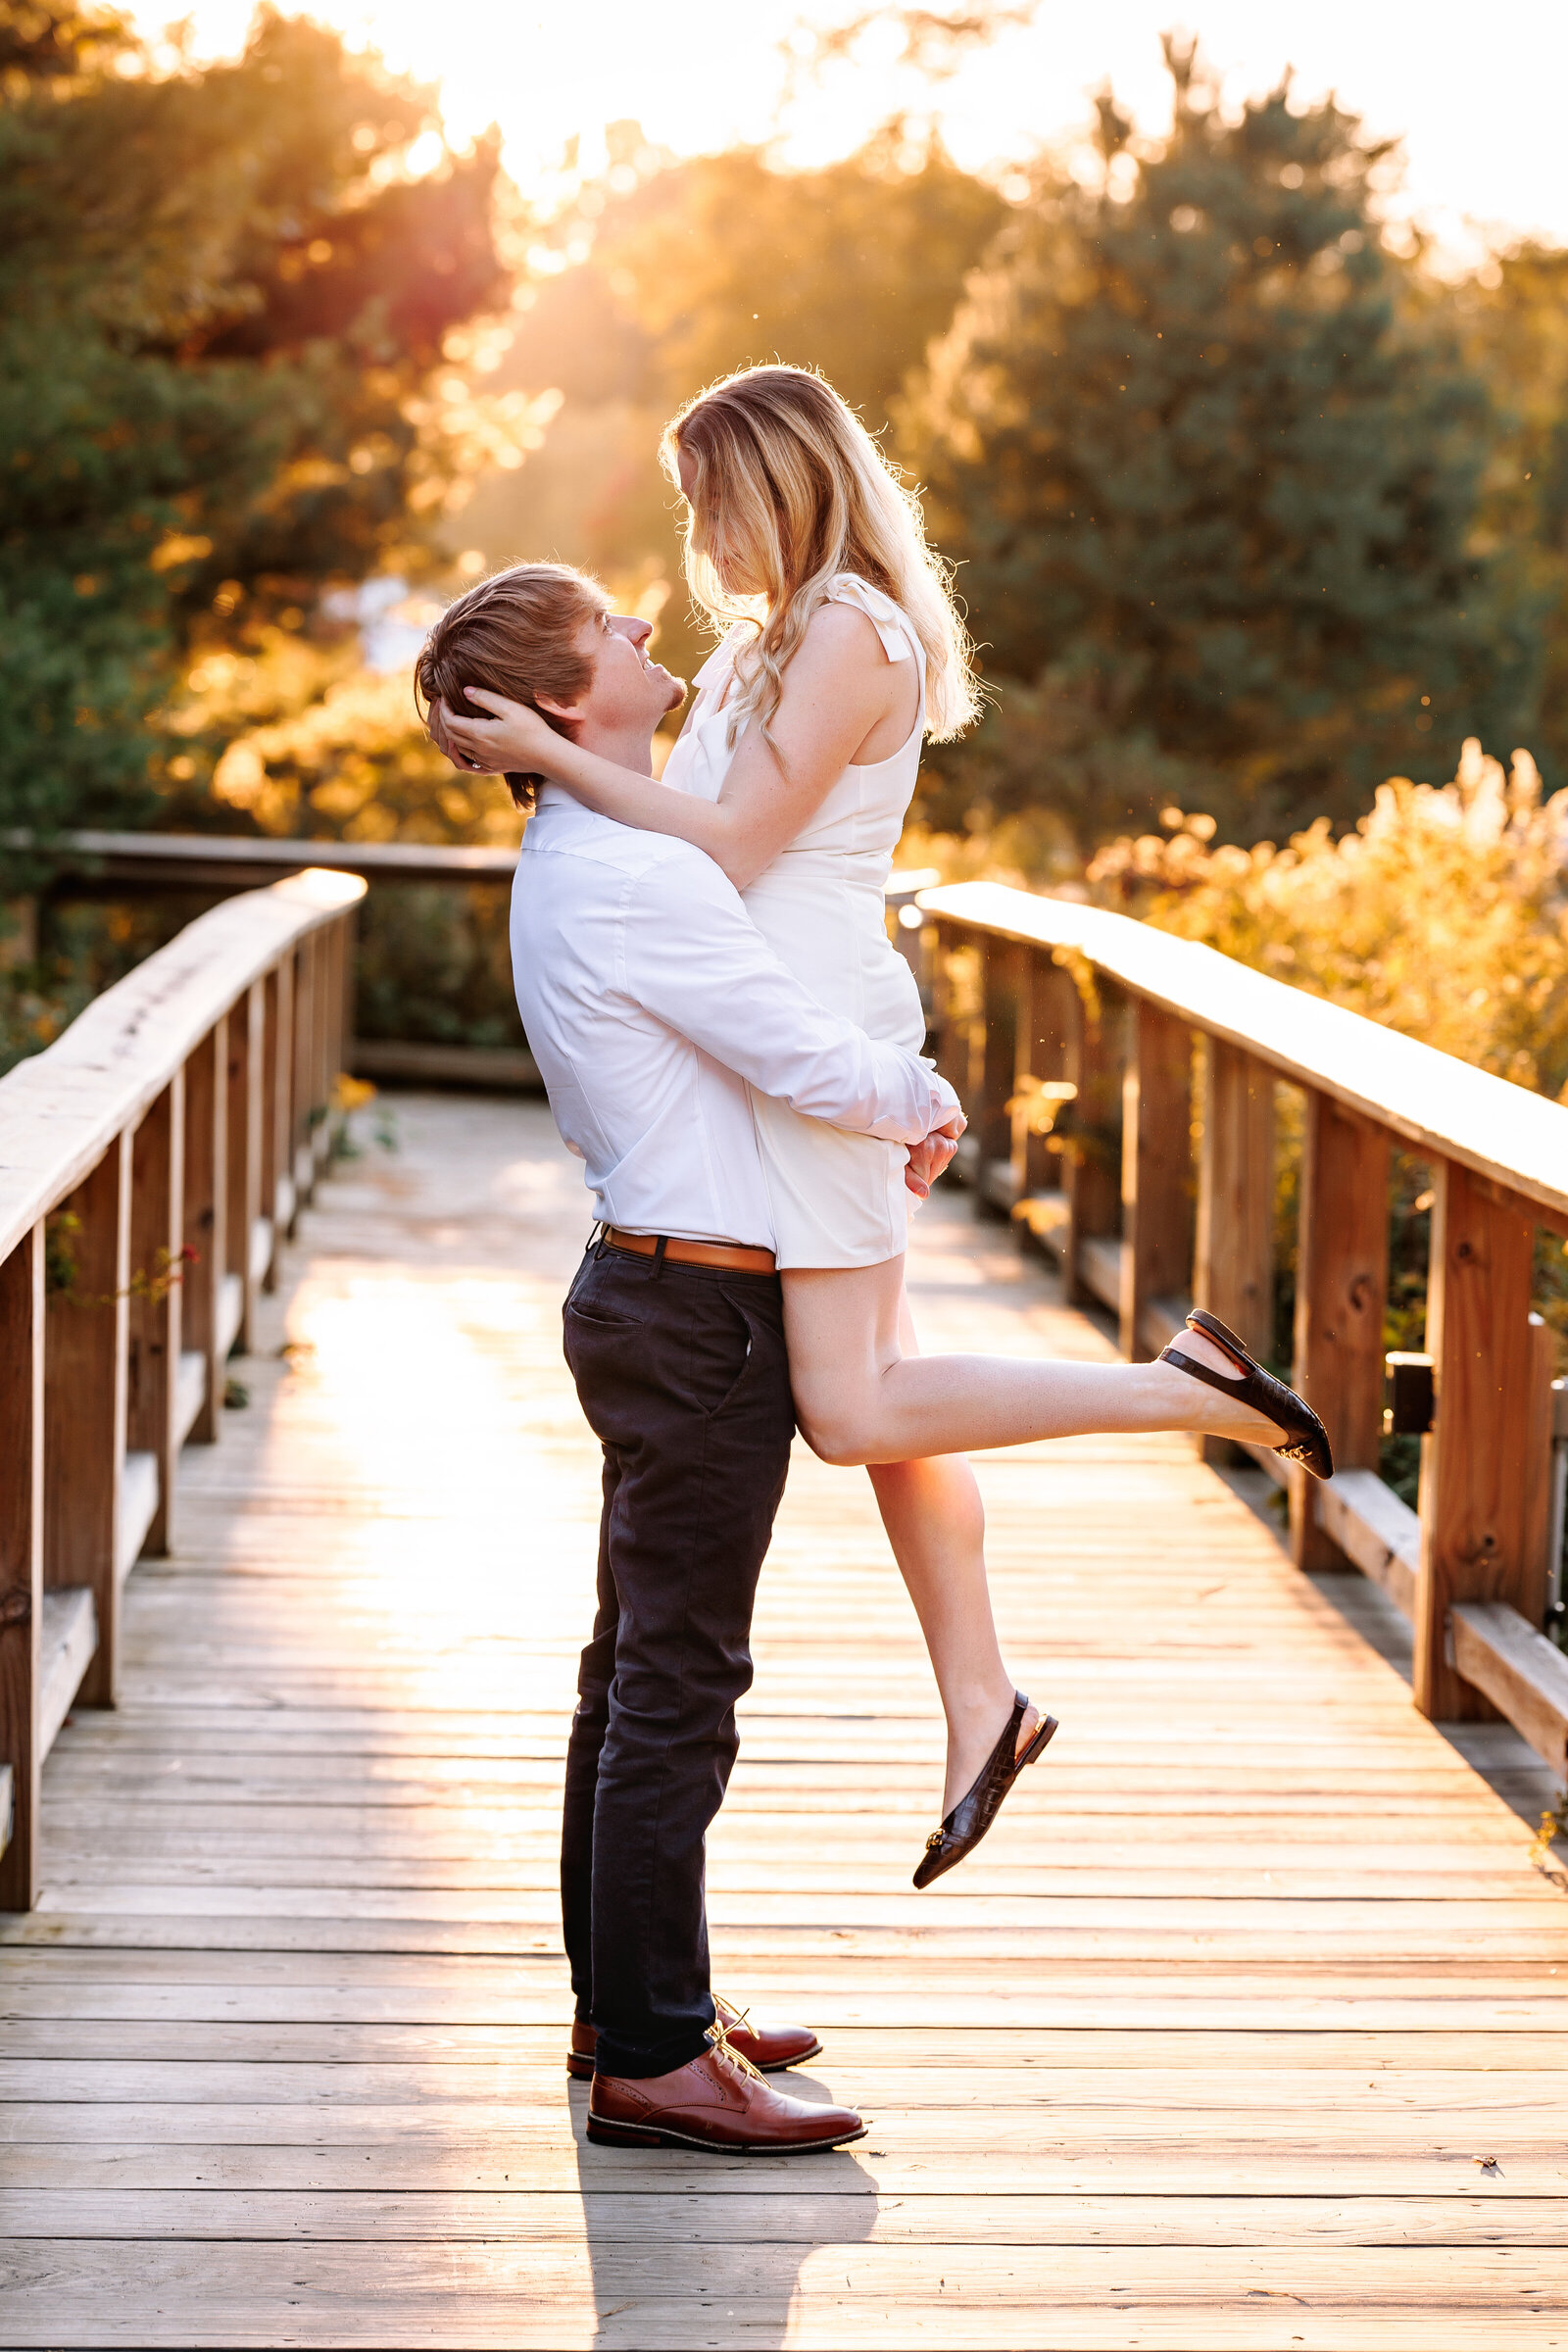 Man lifts up his fiancé along a wooden walkway with the golden glow of the sun in the background